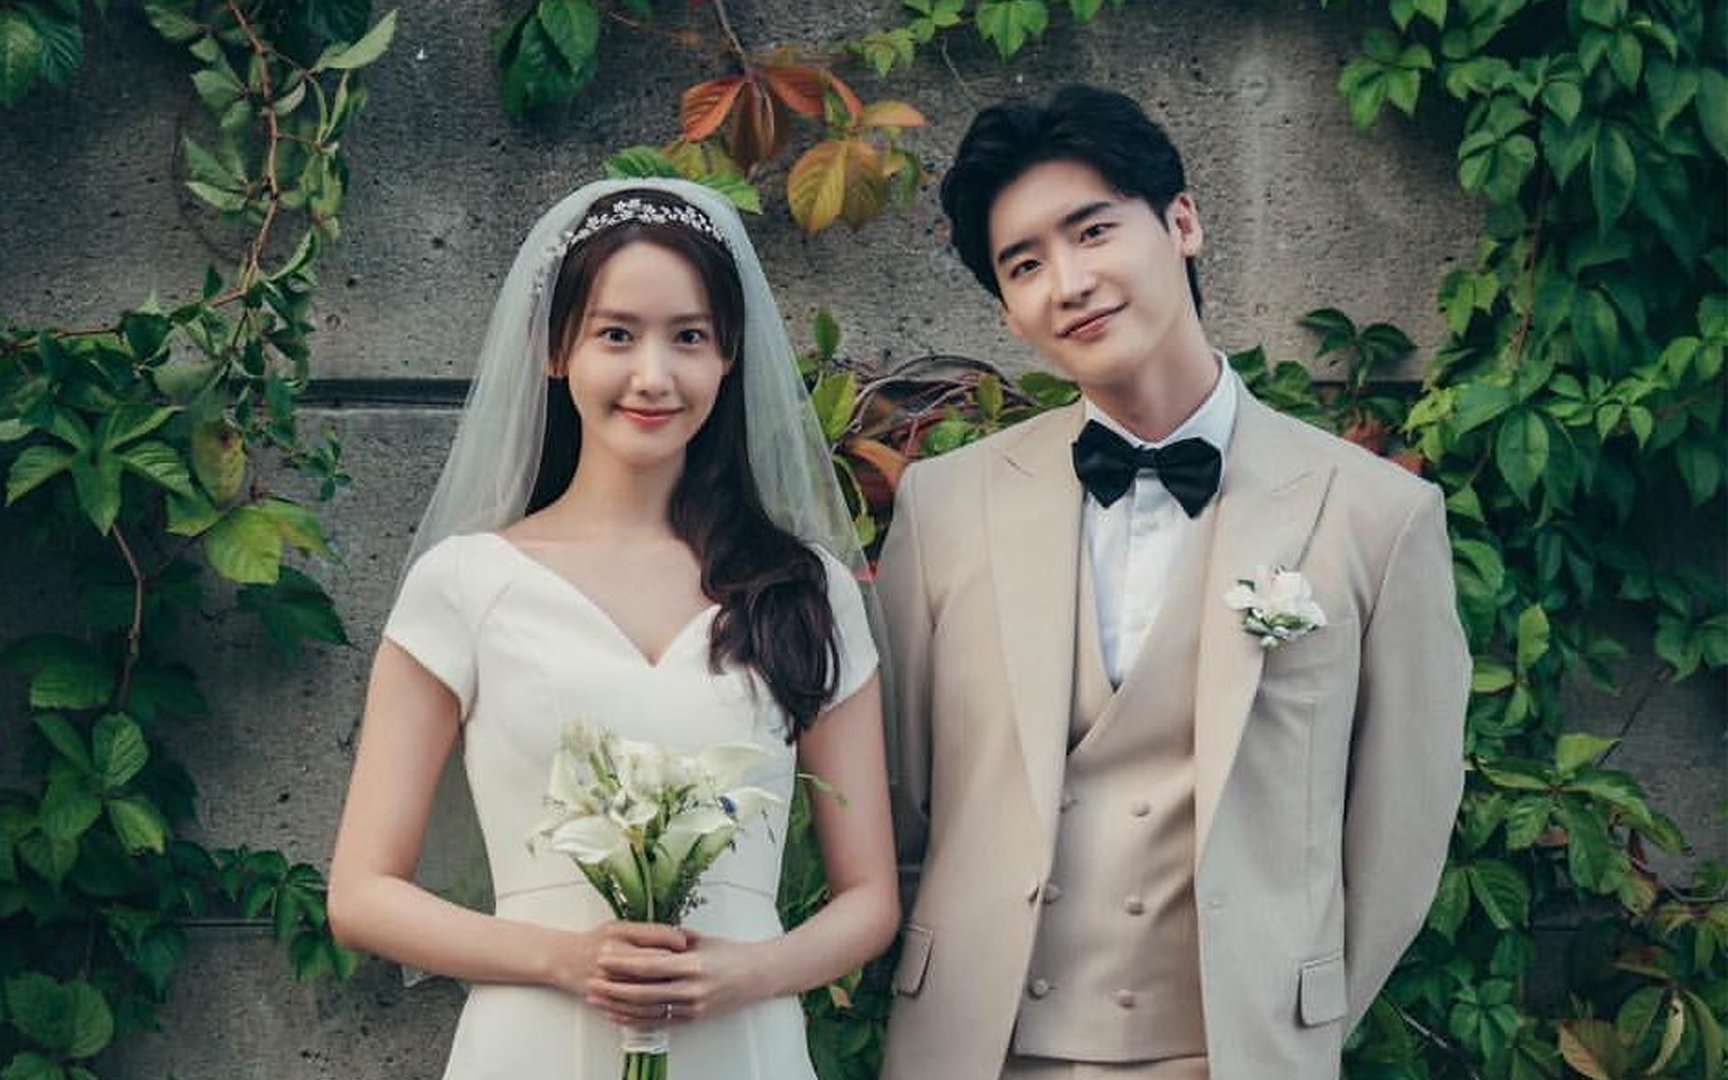 Lovely wedding photos of YoonA and Lee Jong Suk from 'Big Mouth